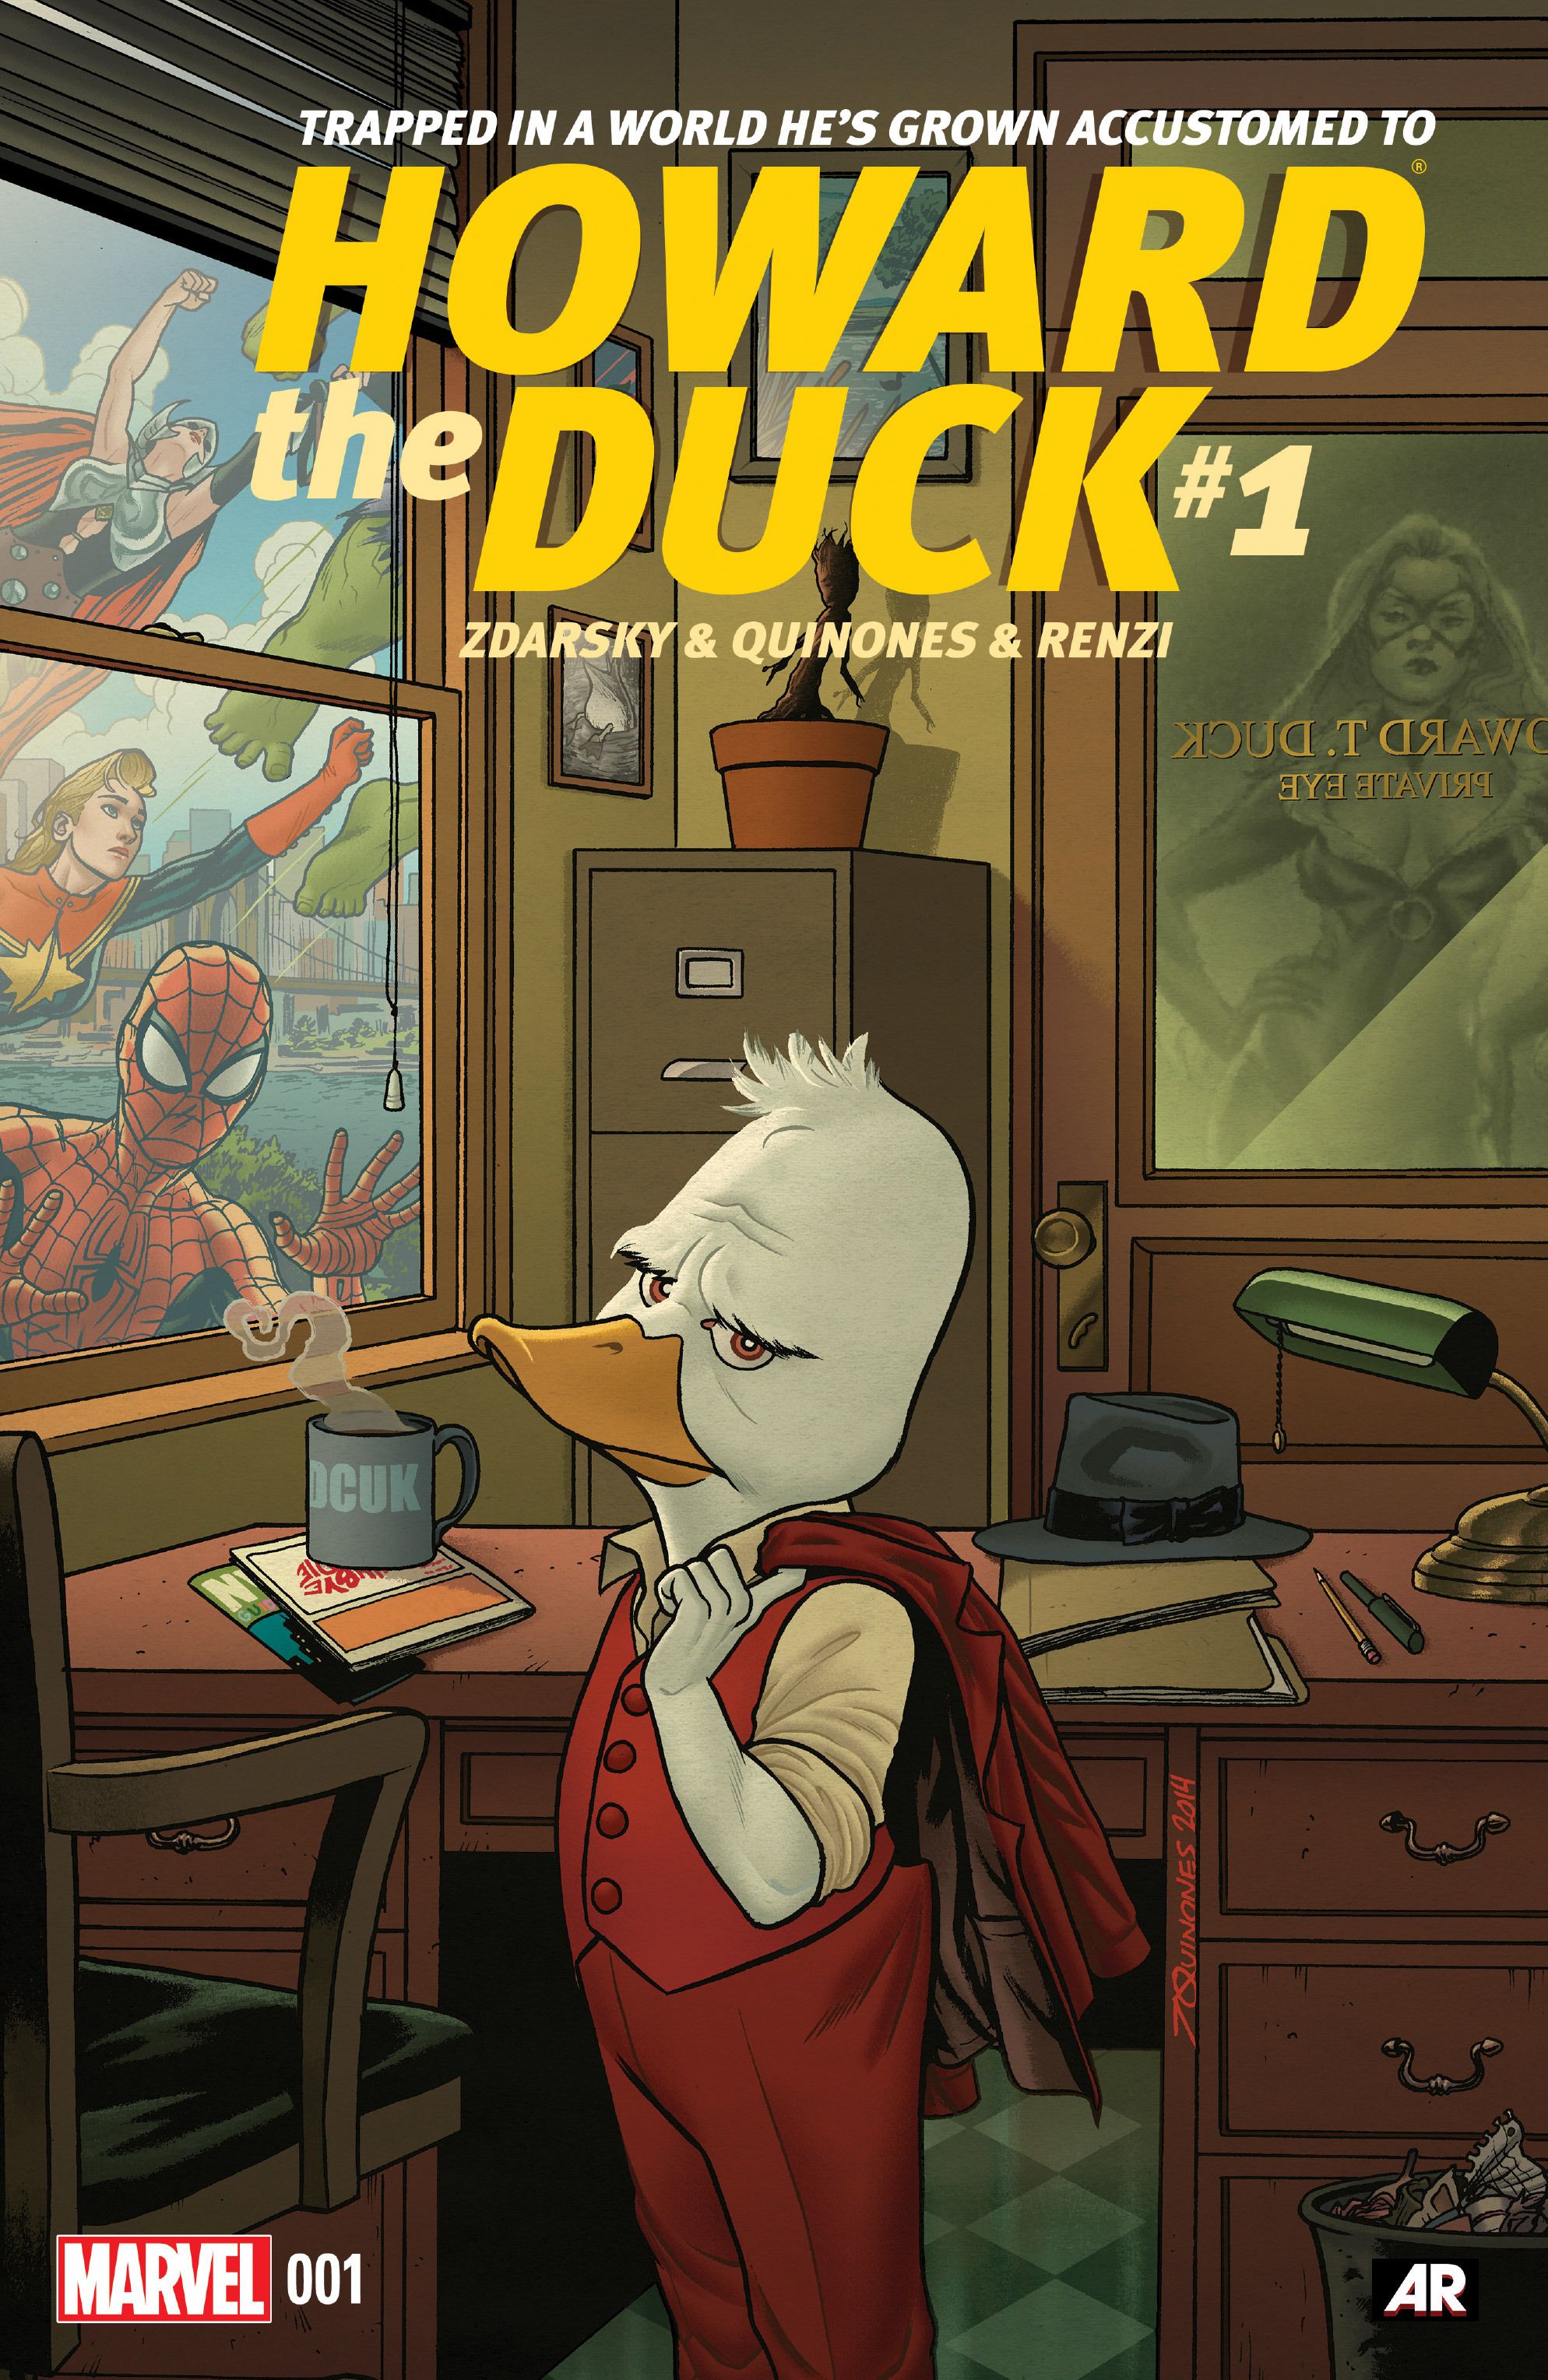 The cover of Howard the Duck #1 in 2015